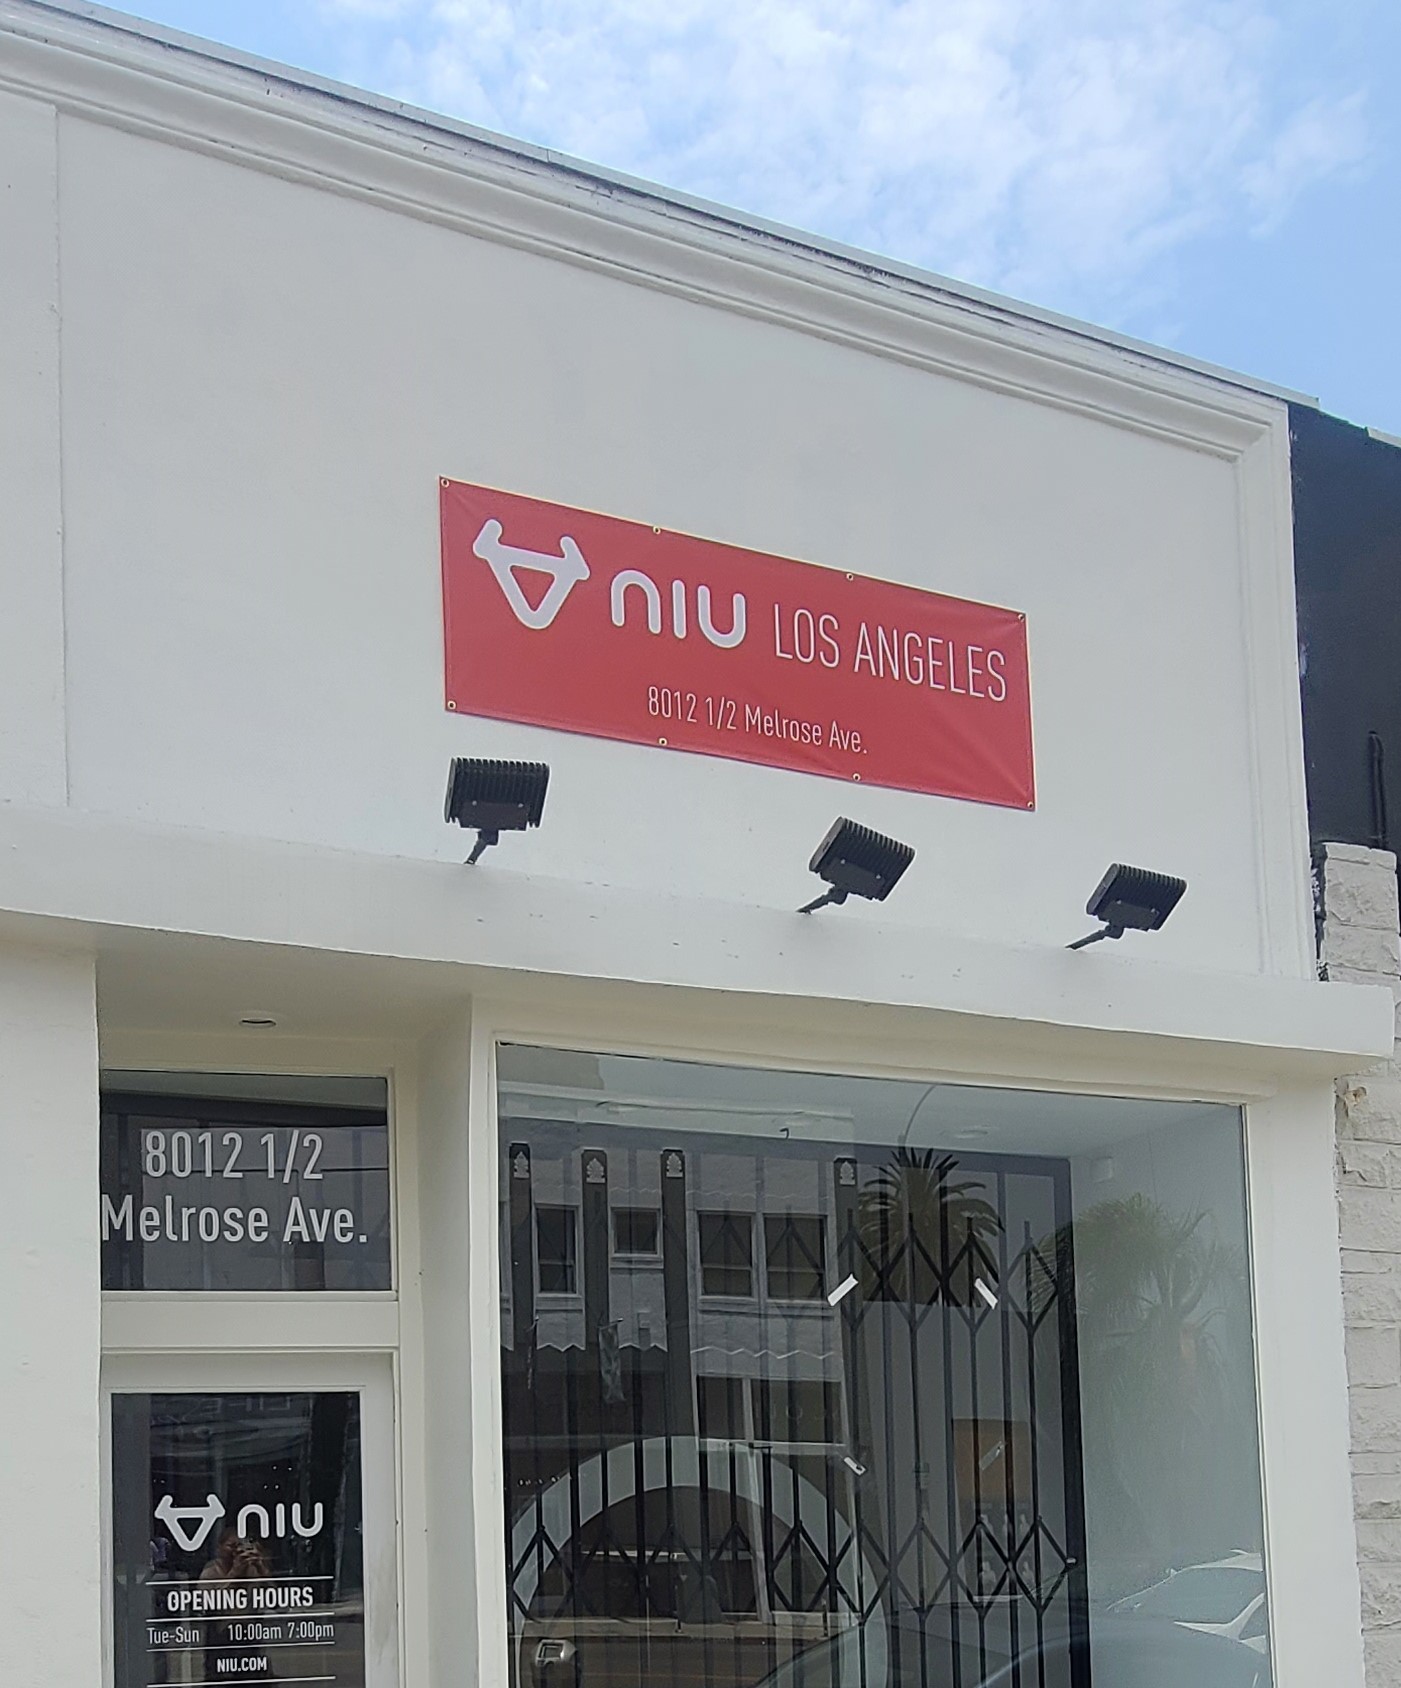 You are currently viewing Storefront Banner for NIU Los Angeles in West Hollywood